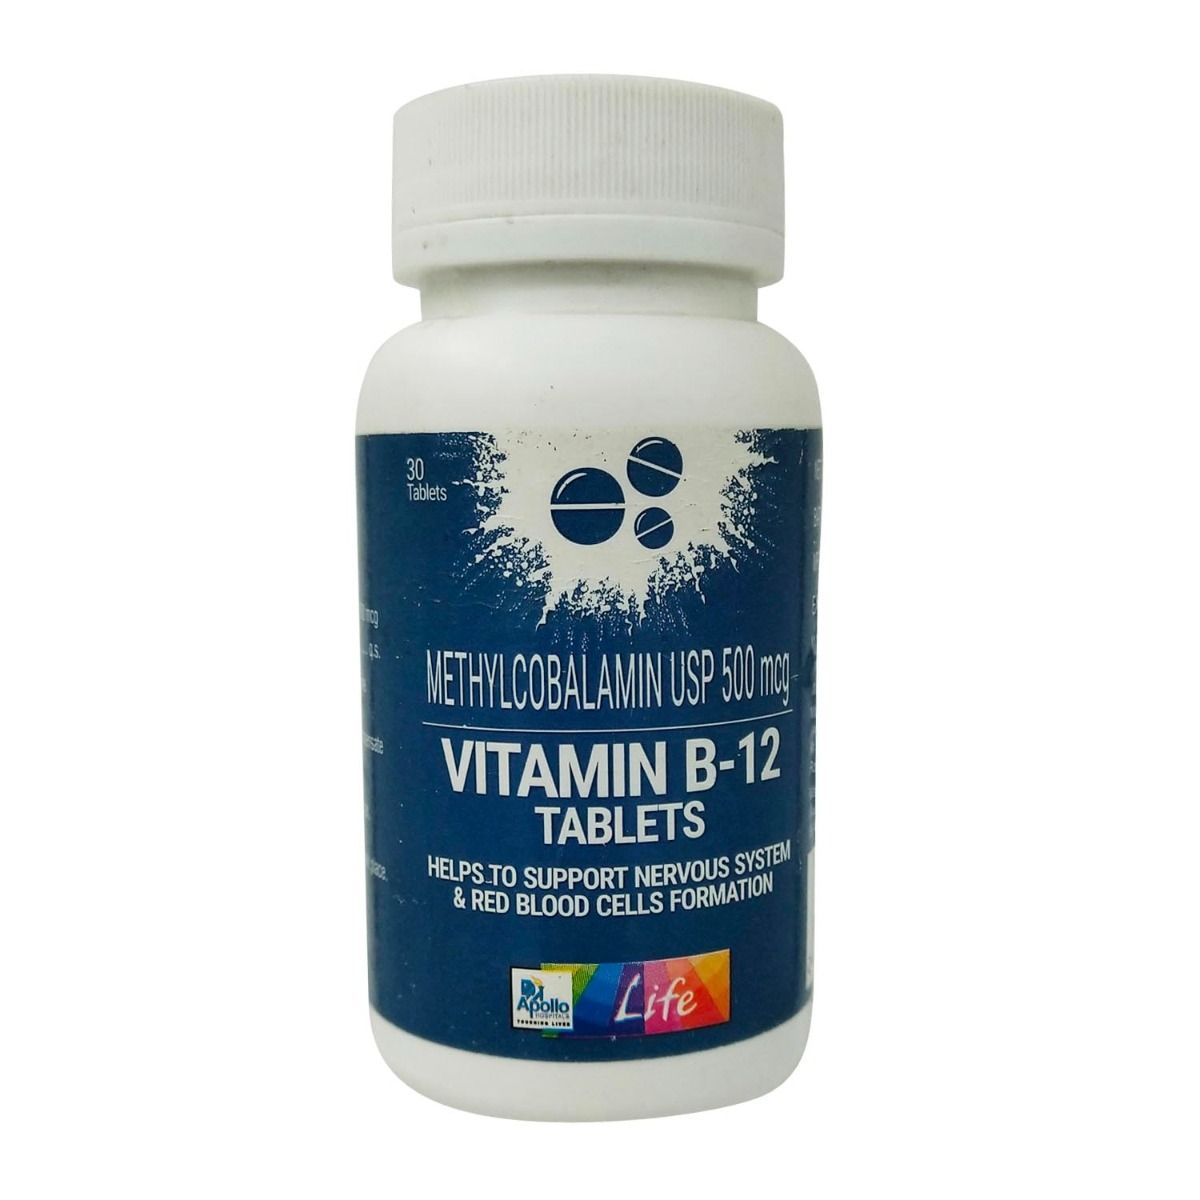 Apollo Life Vitamin B-12, 30 Tablets, Pack of 1 